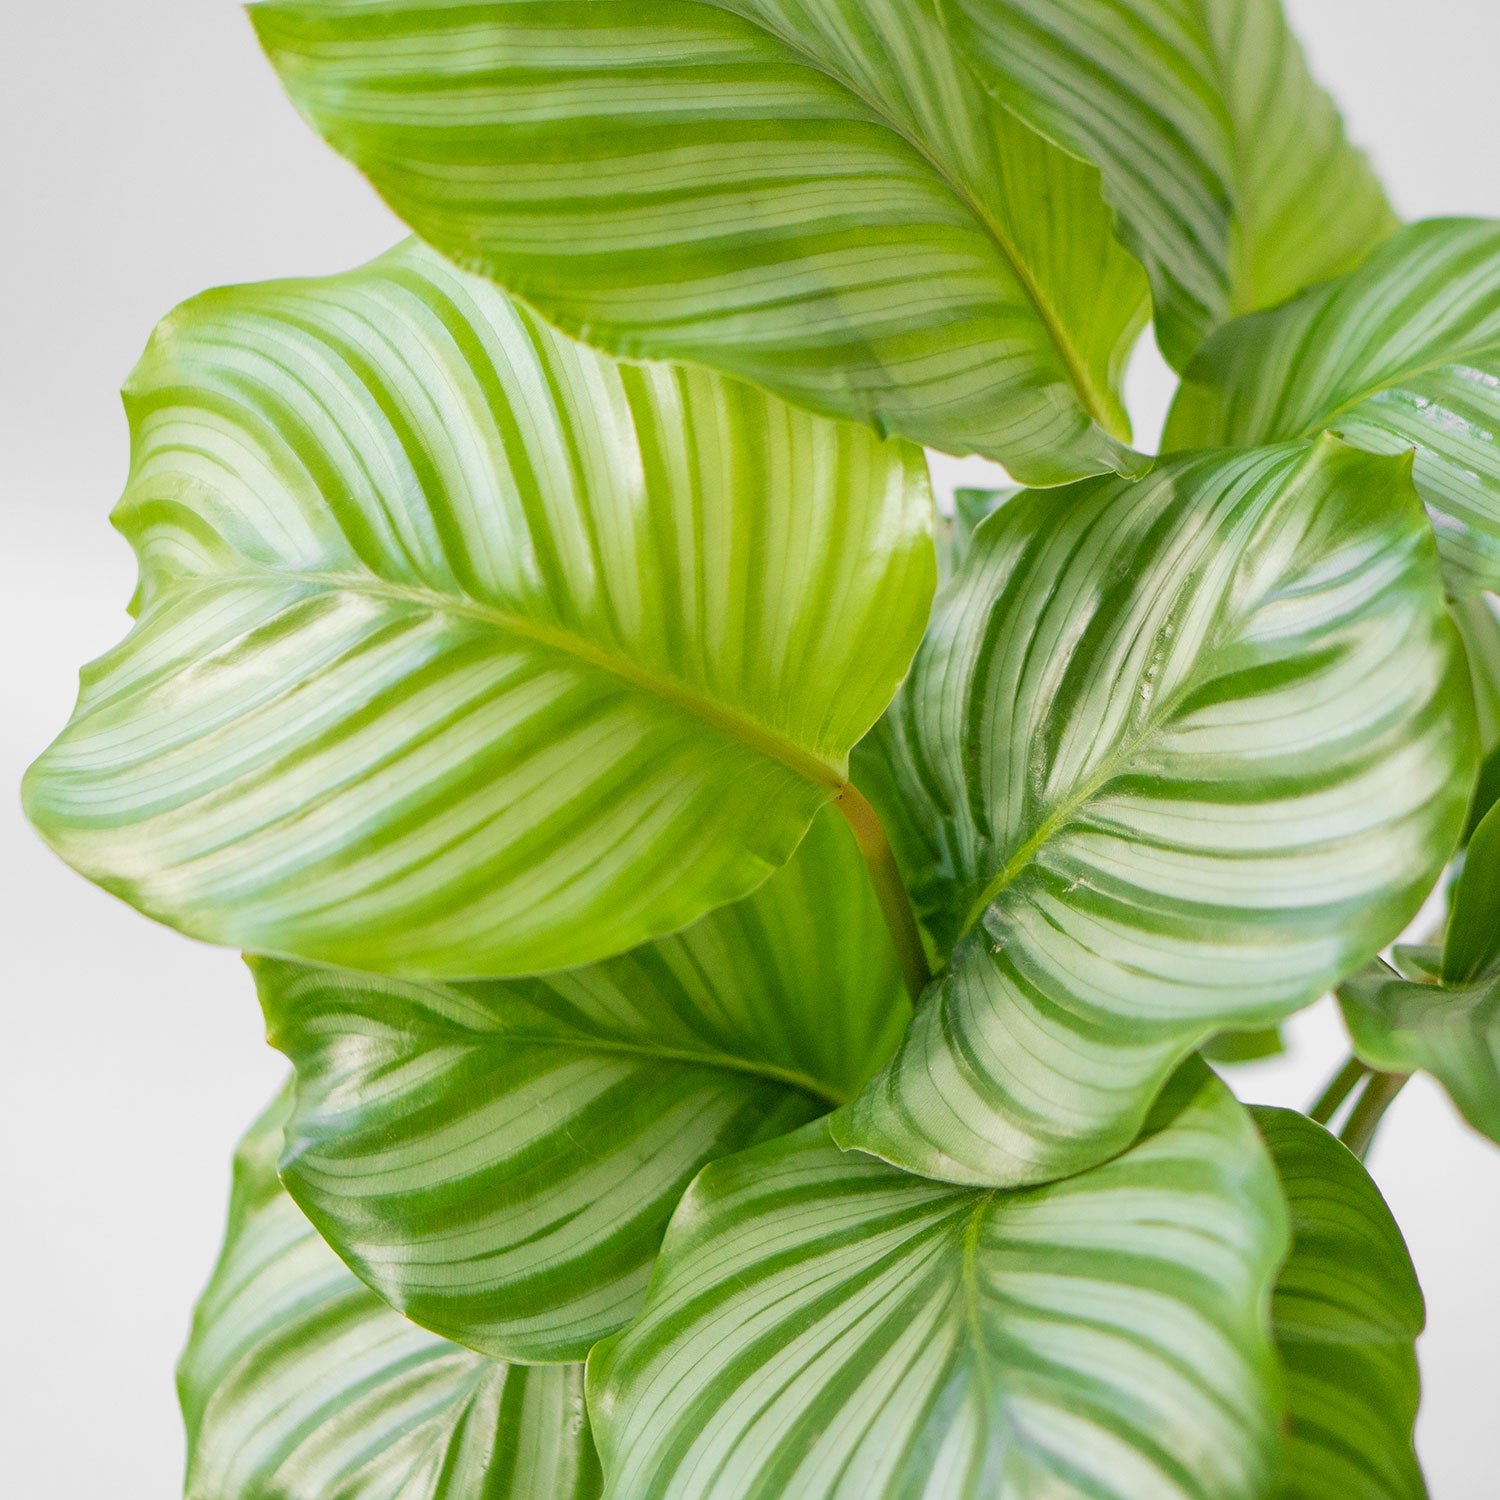 Leaves of Prayer Plant - Top Quality Potted Houseplant Calathea Orbifolia 6” - Buy repotted indoor plant Calathea Orbifolia for delivery at Planteia